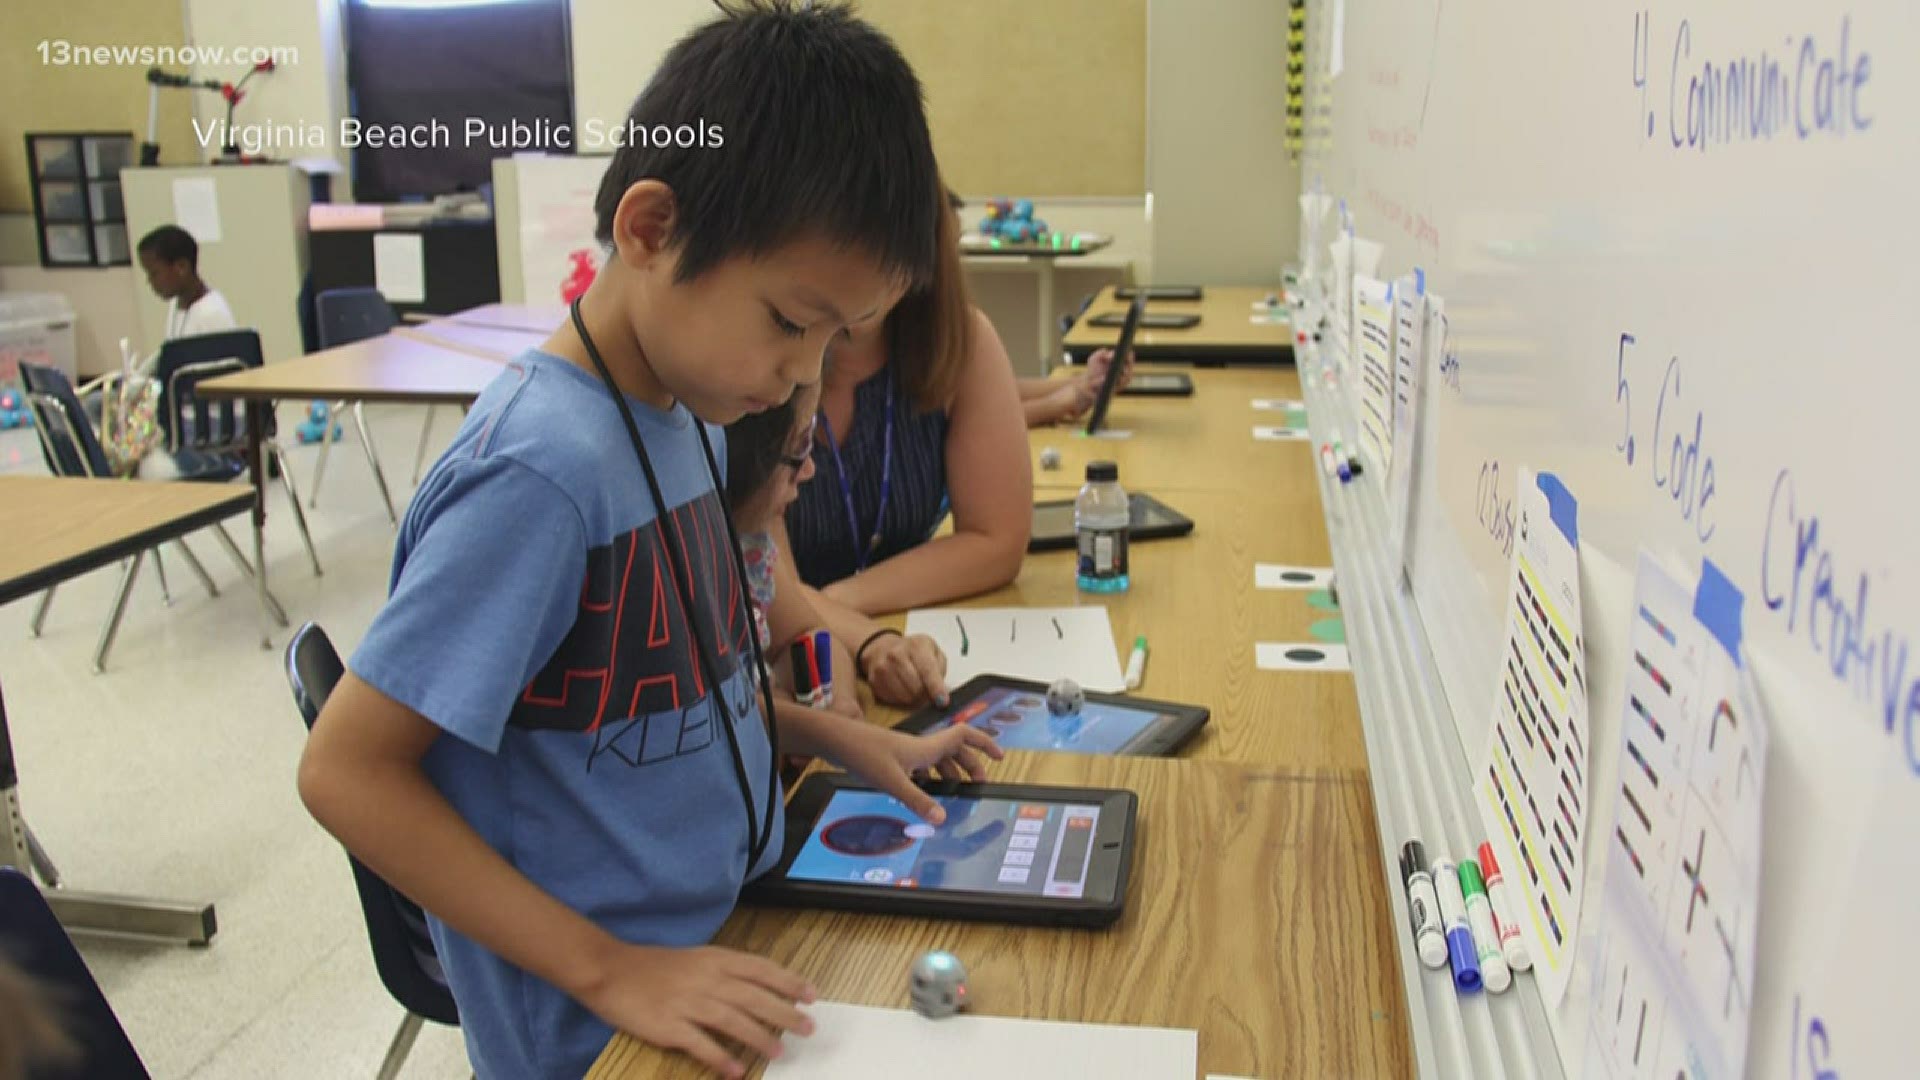 In several districts, summer schools are continuing online this year.